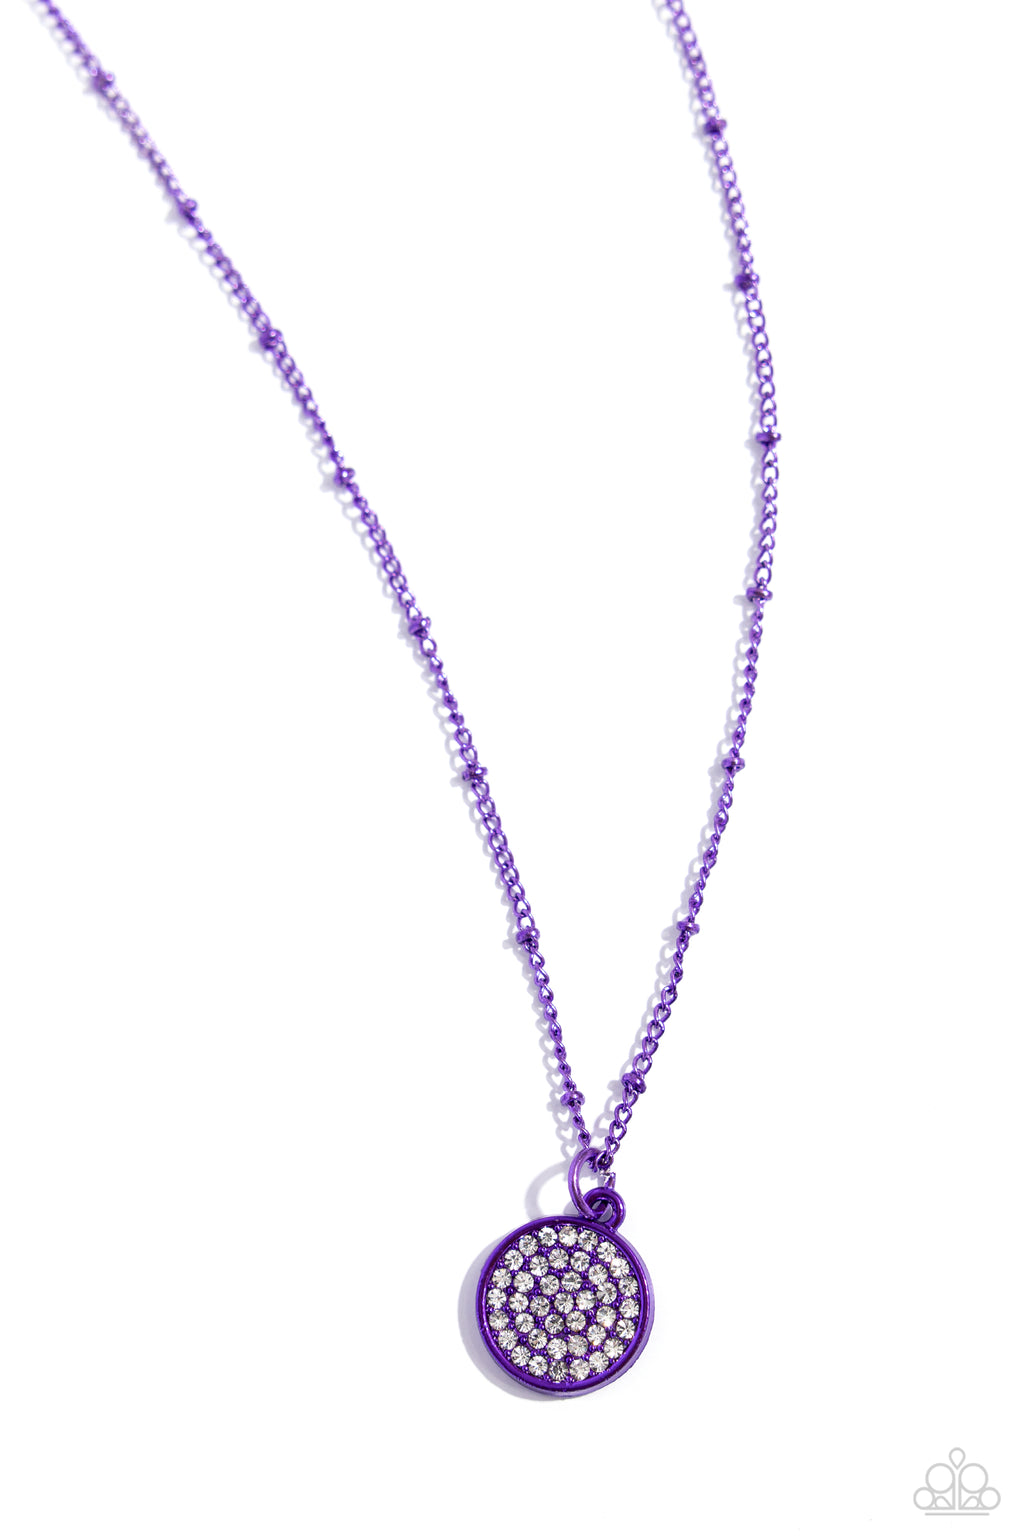 five-dollar-jewelry-bejeweled-basic-purple-necklace-paparazzi-accessories